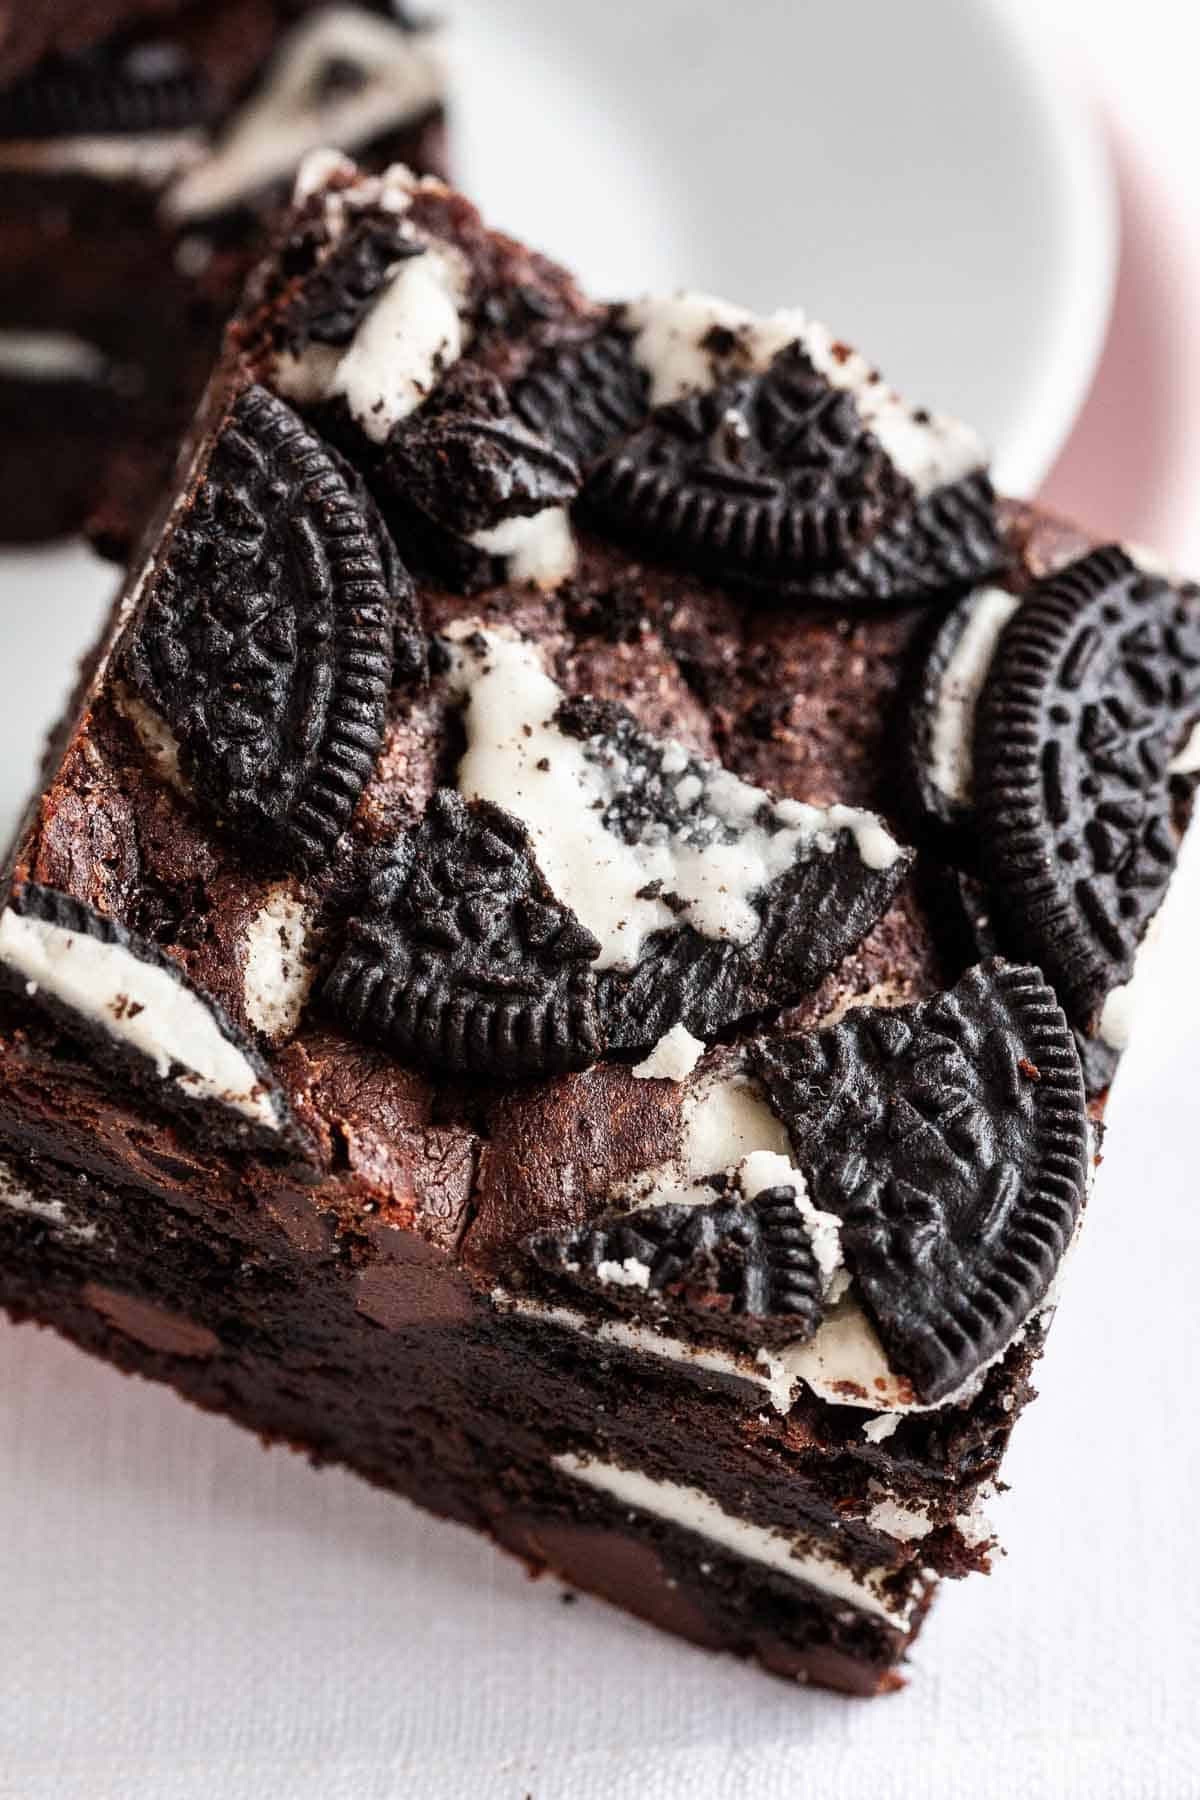 A brownie with Oreo cookies on top leaning against a plate.